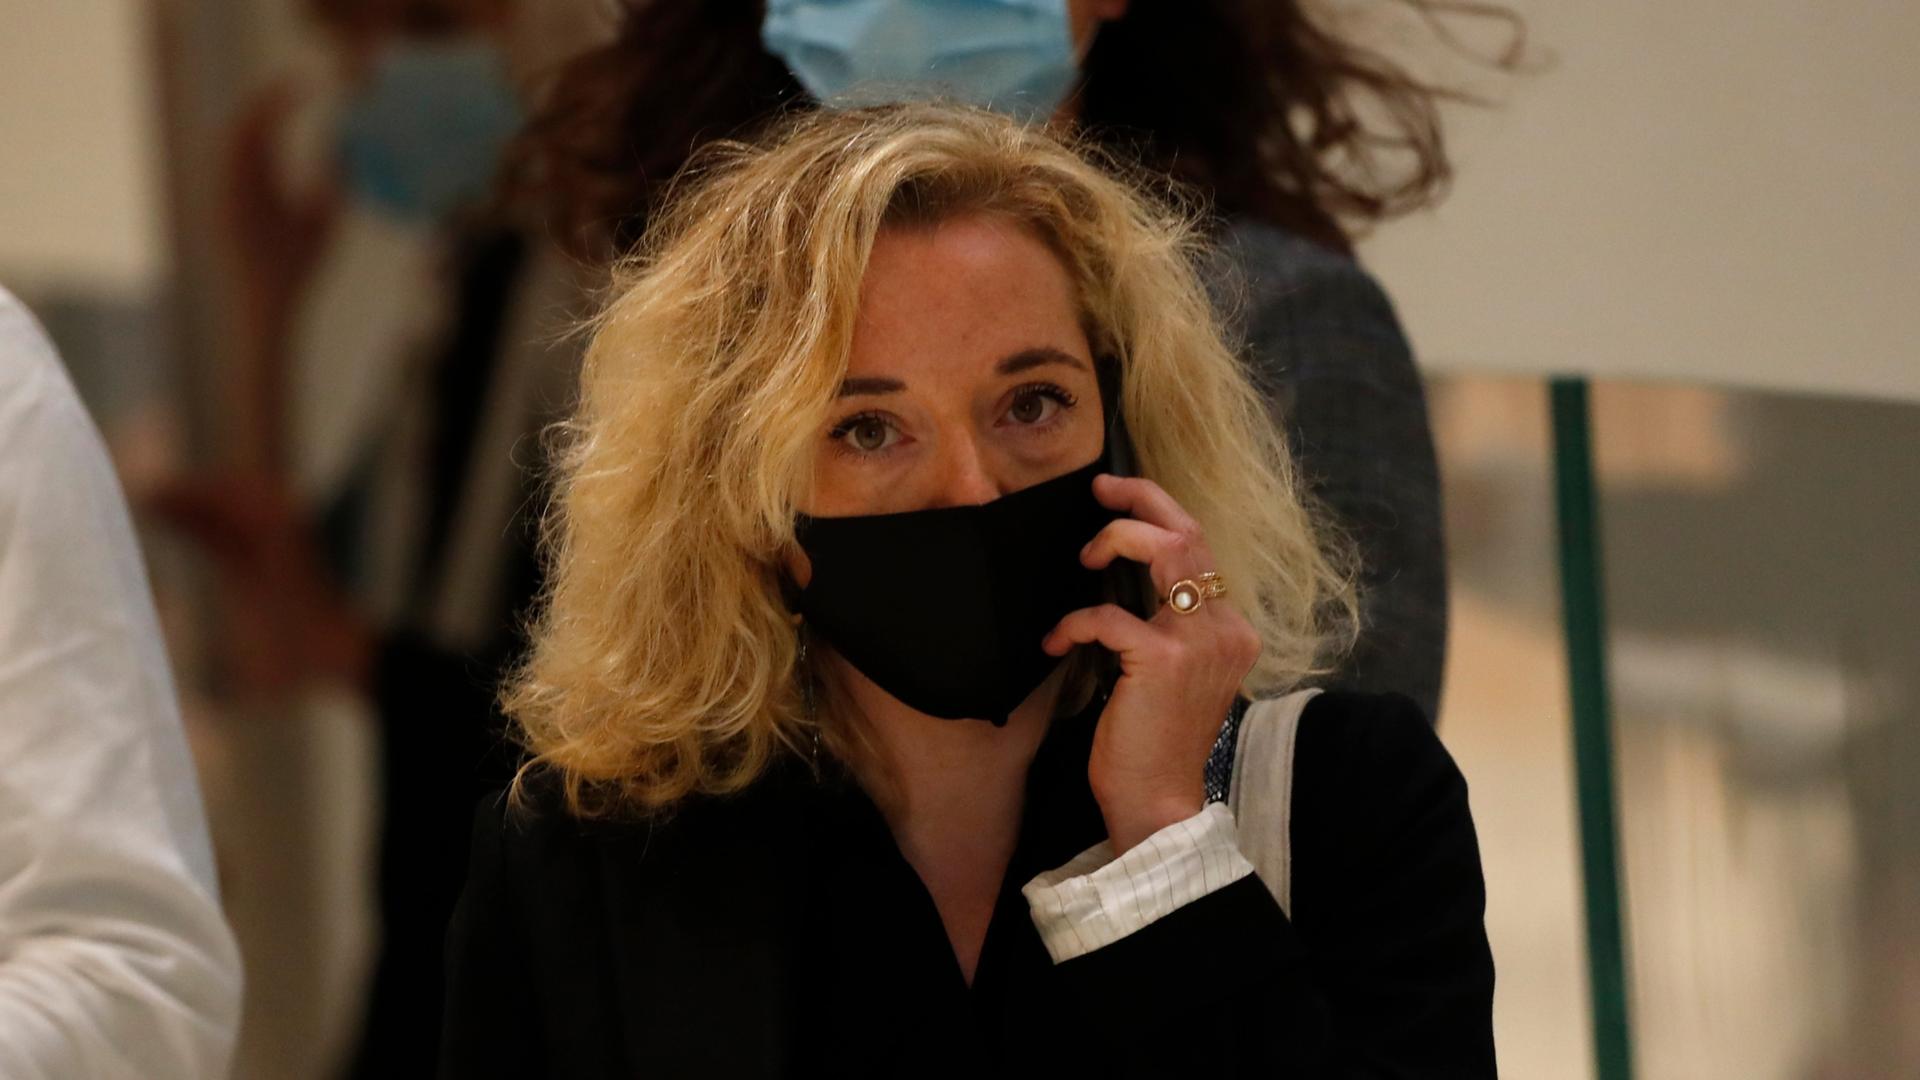 Chloe Verlhac, widow of Charlie Hebdo cartoonist Tignous, arrives at the courtroom for the opening of the 2015 attacks trial, Sept. 2, 2020, in Paris.